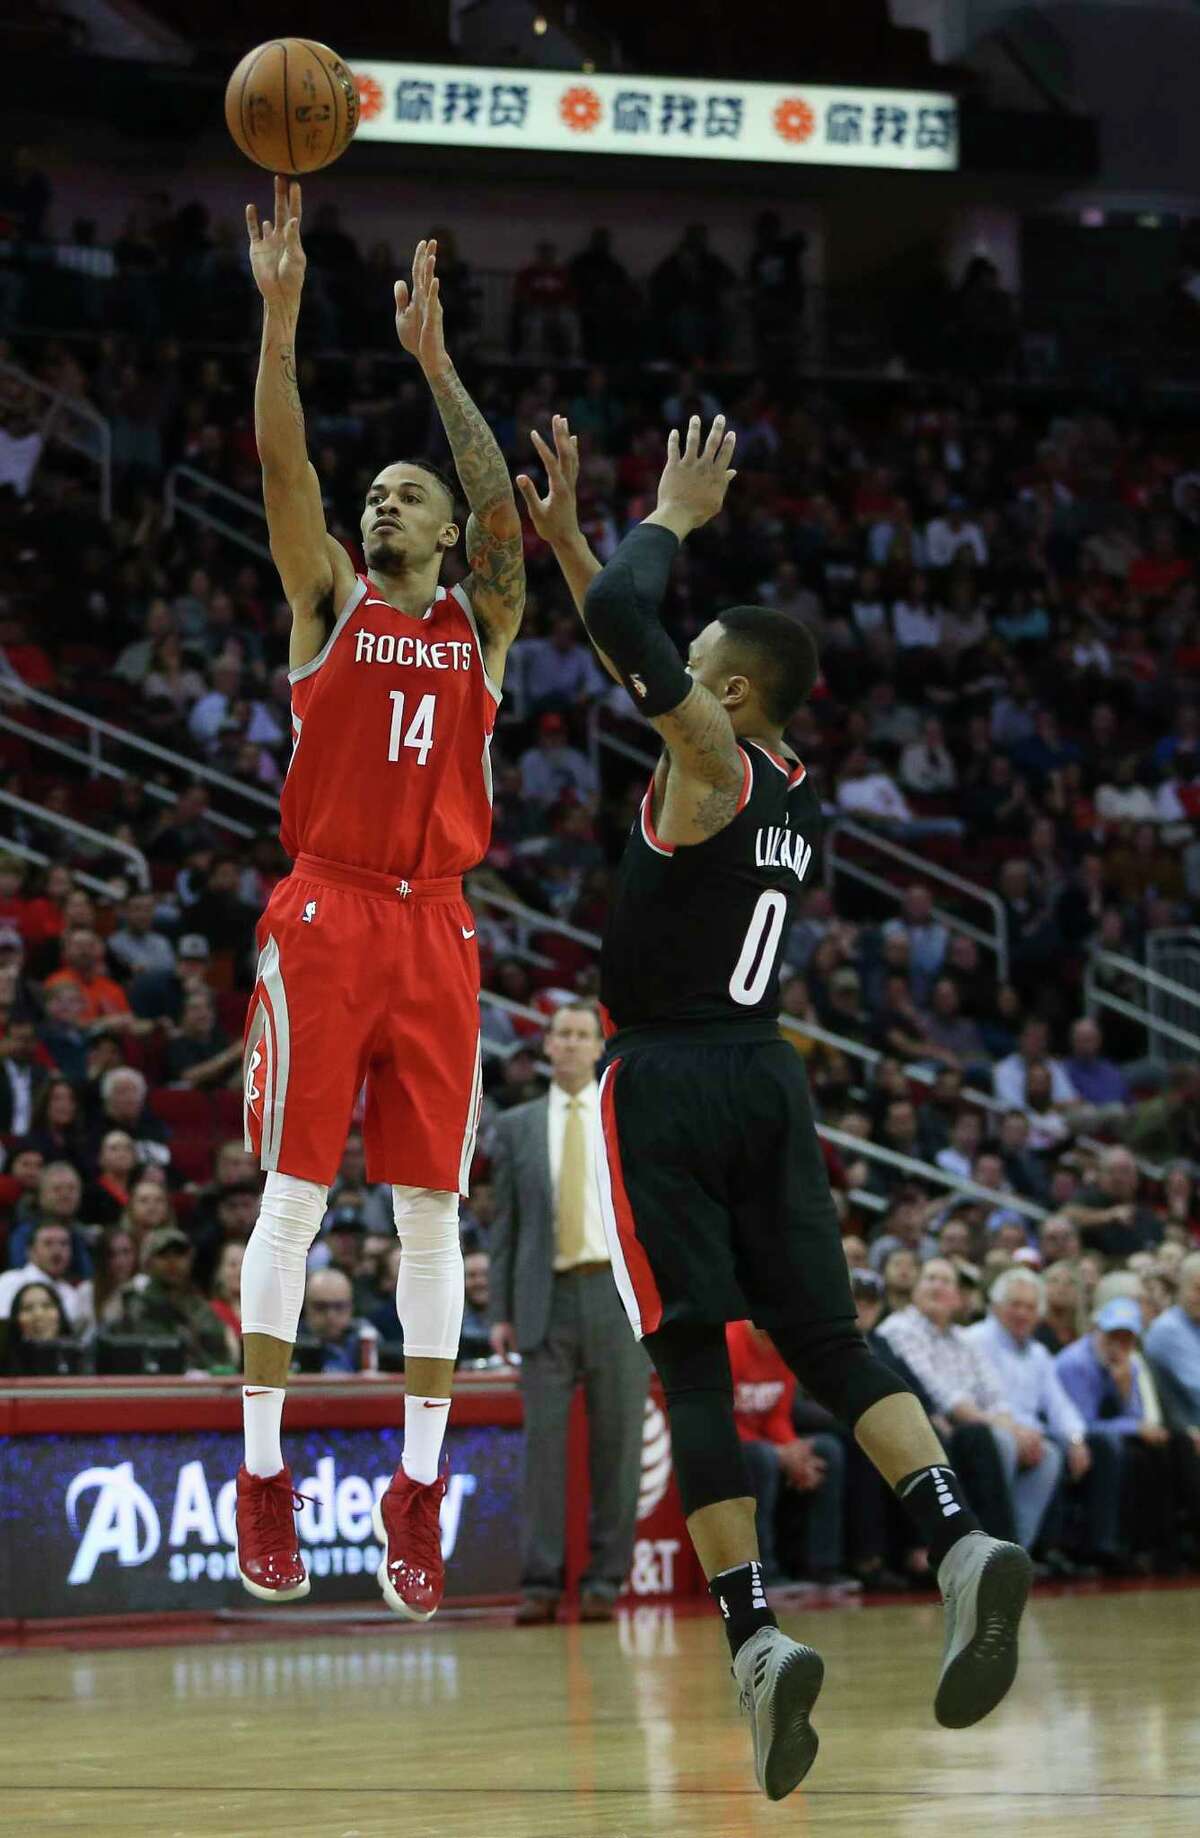 The Rockets got a jump on making a signficant in-season acquisition when they signed free-agent guard Gerald Green (14) in late December.